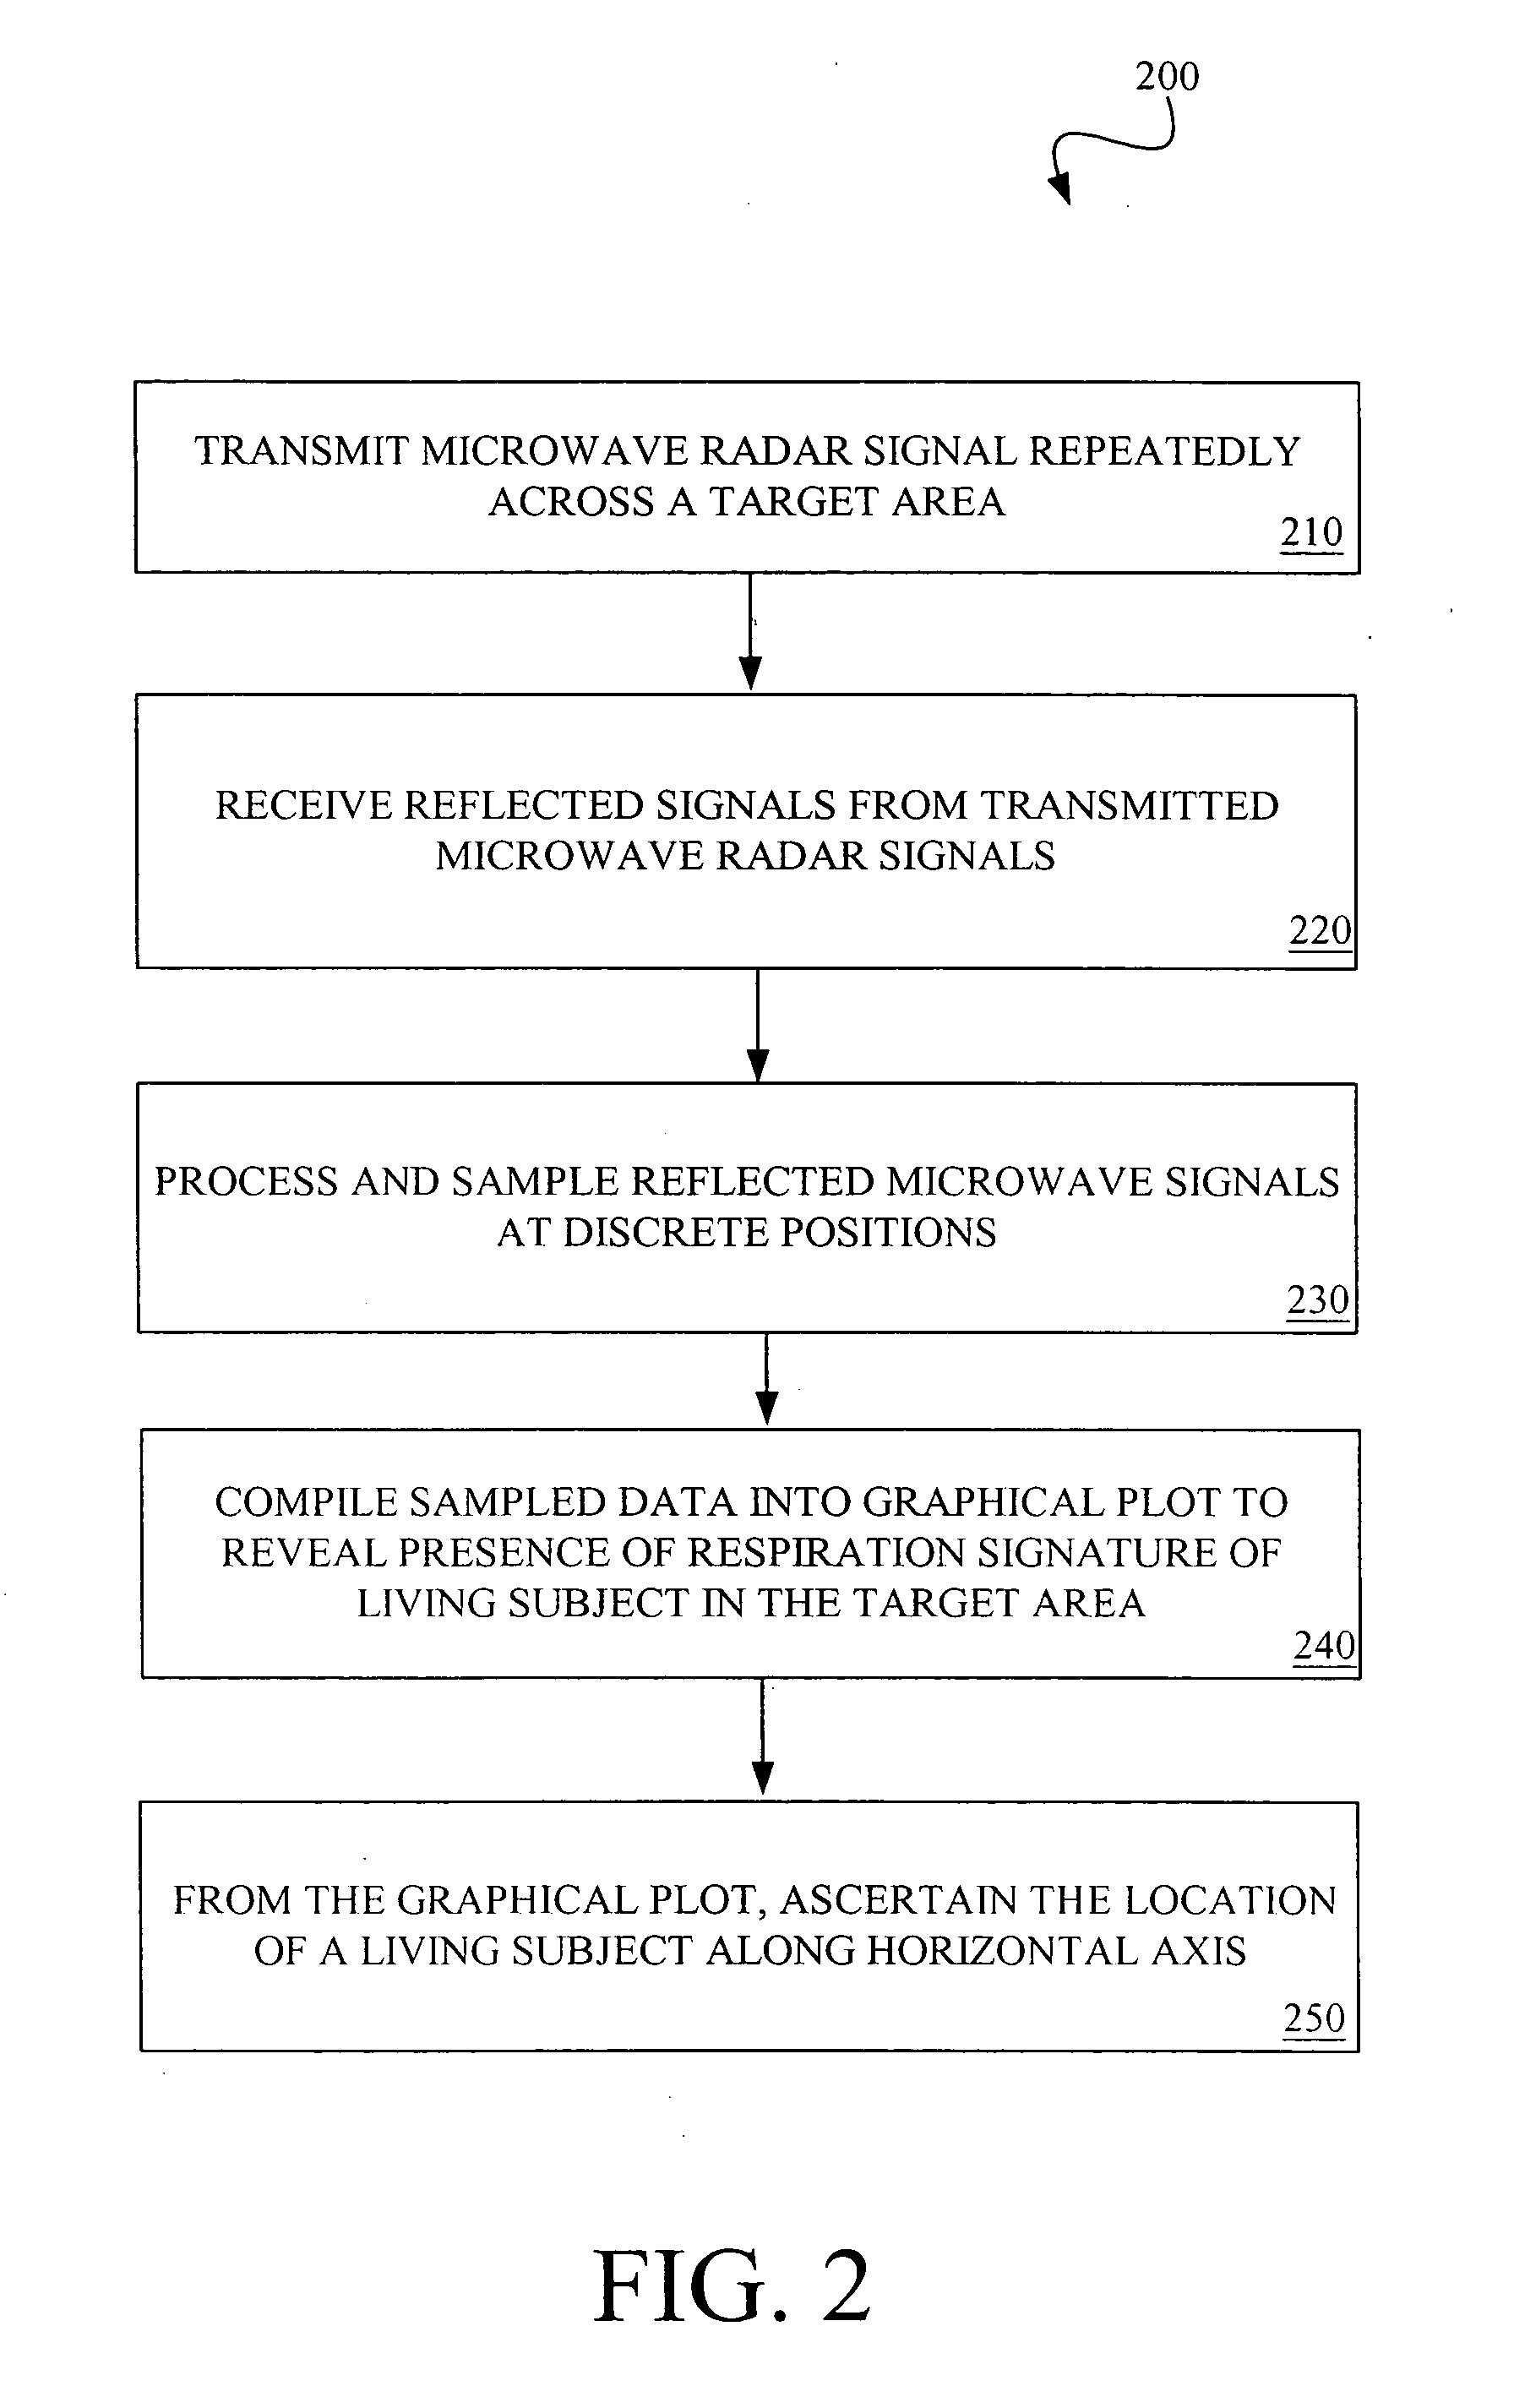 Radar detection device employing a scanning antenna system